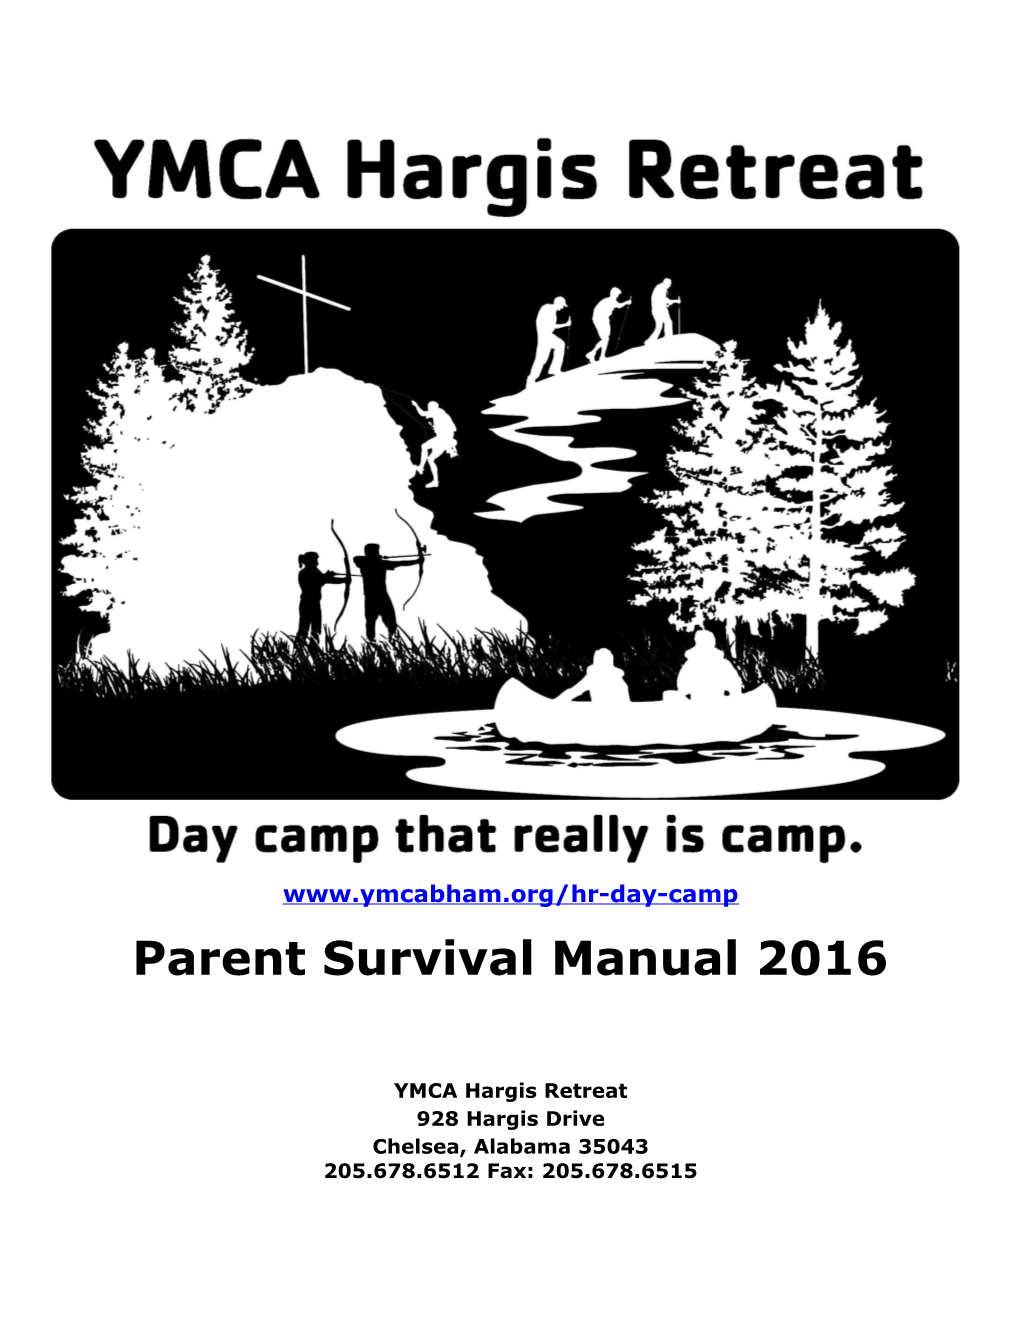 Welcome to YMCA Hargis Retreat S Summer Day Camp!